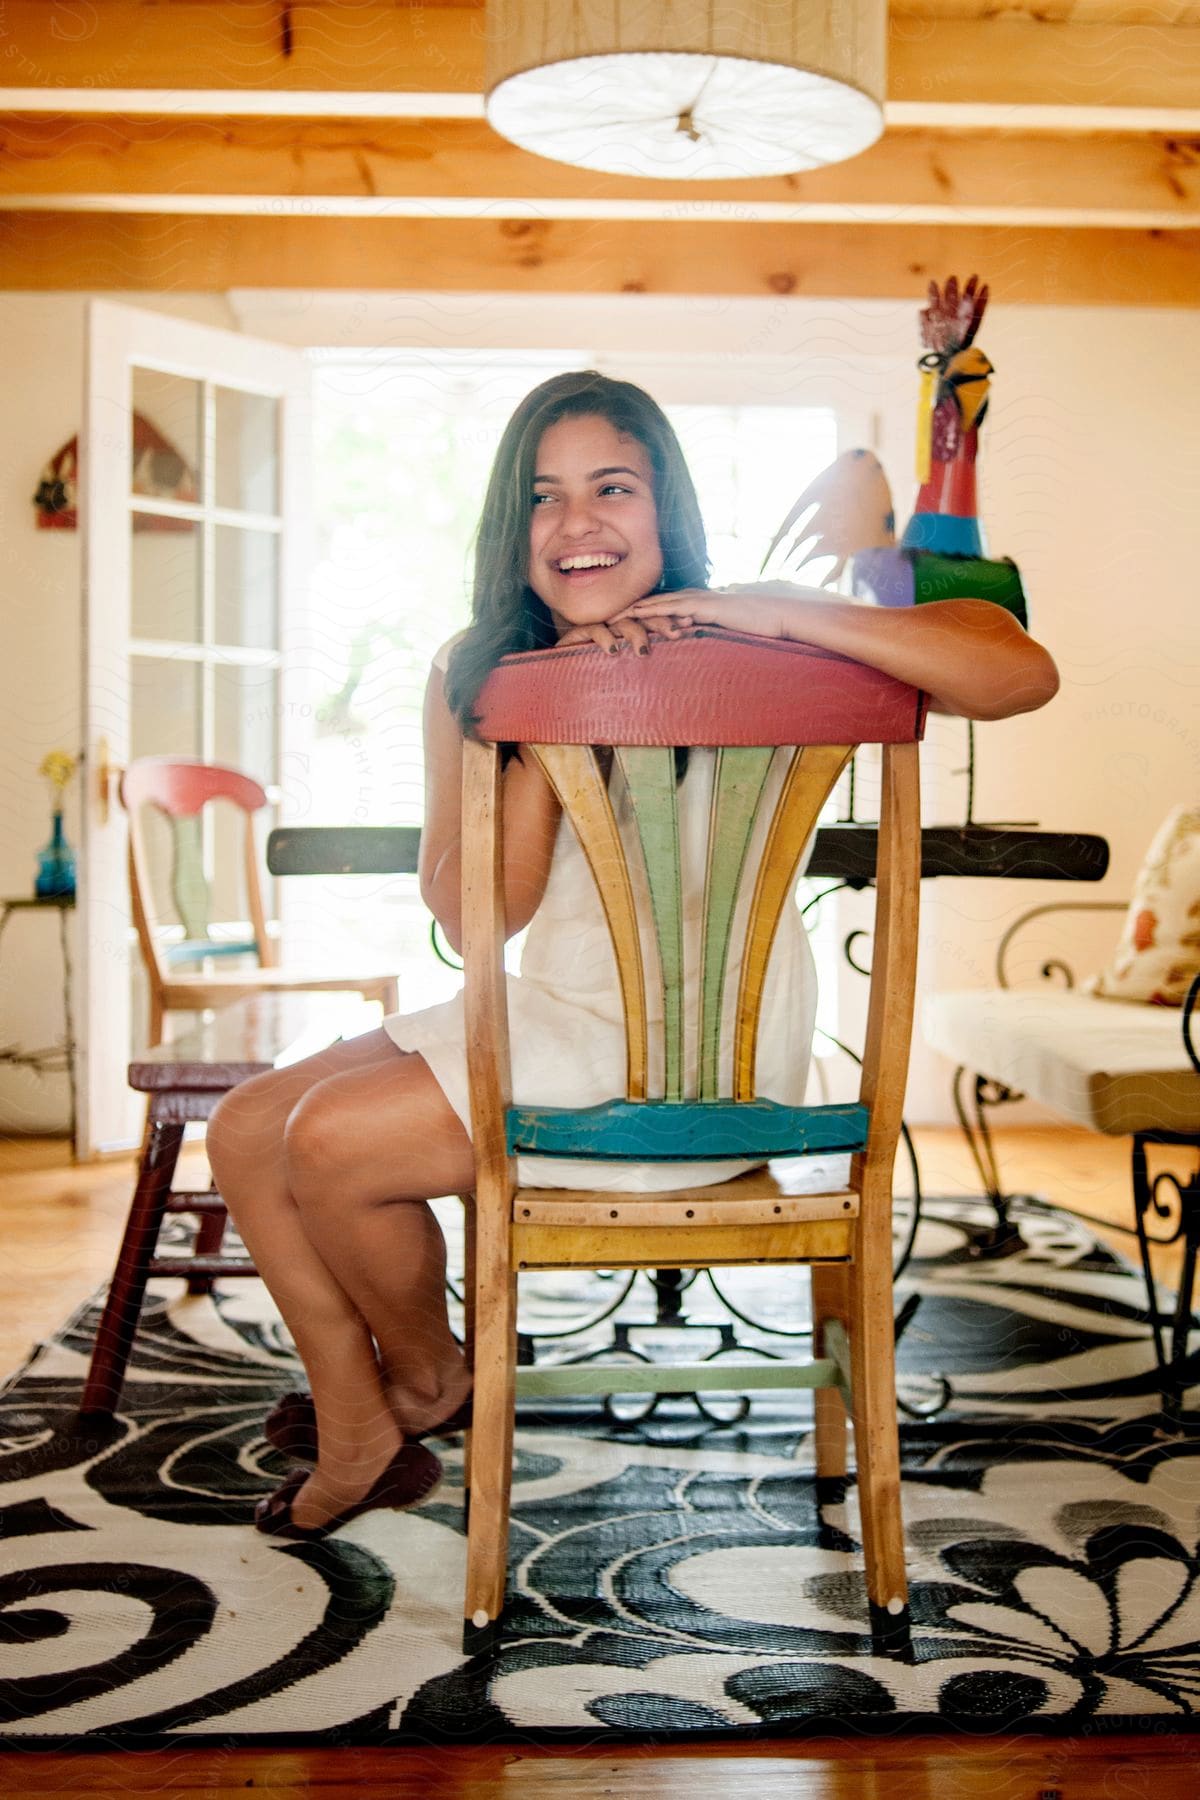 A woman in a white dress sits in a colorful chair in a dining room smiling as sunlight comes through the open door